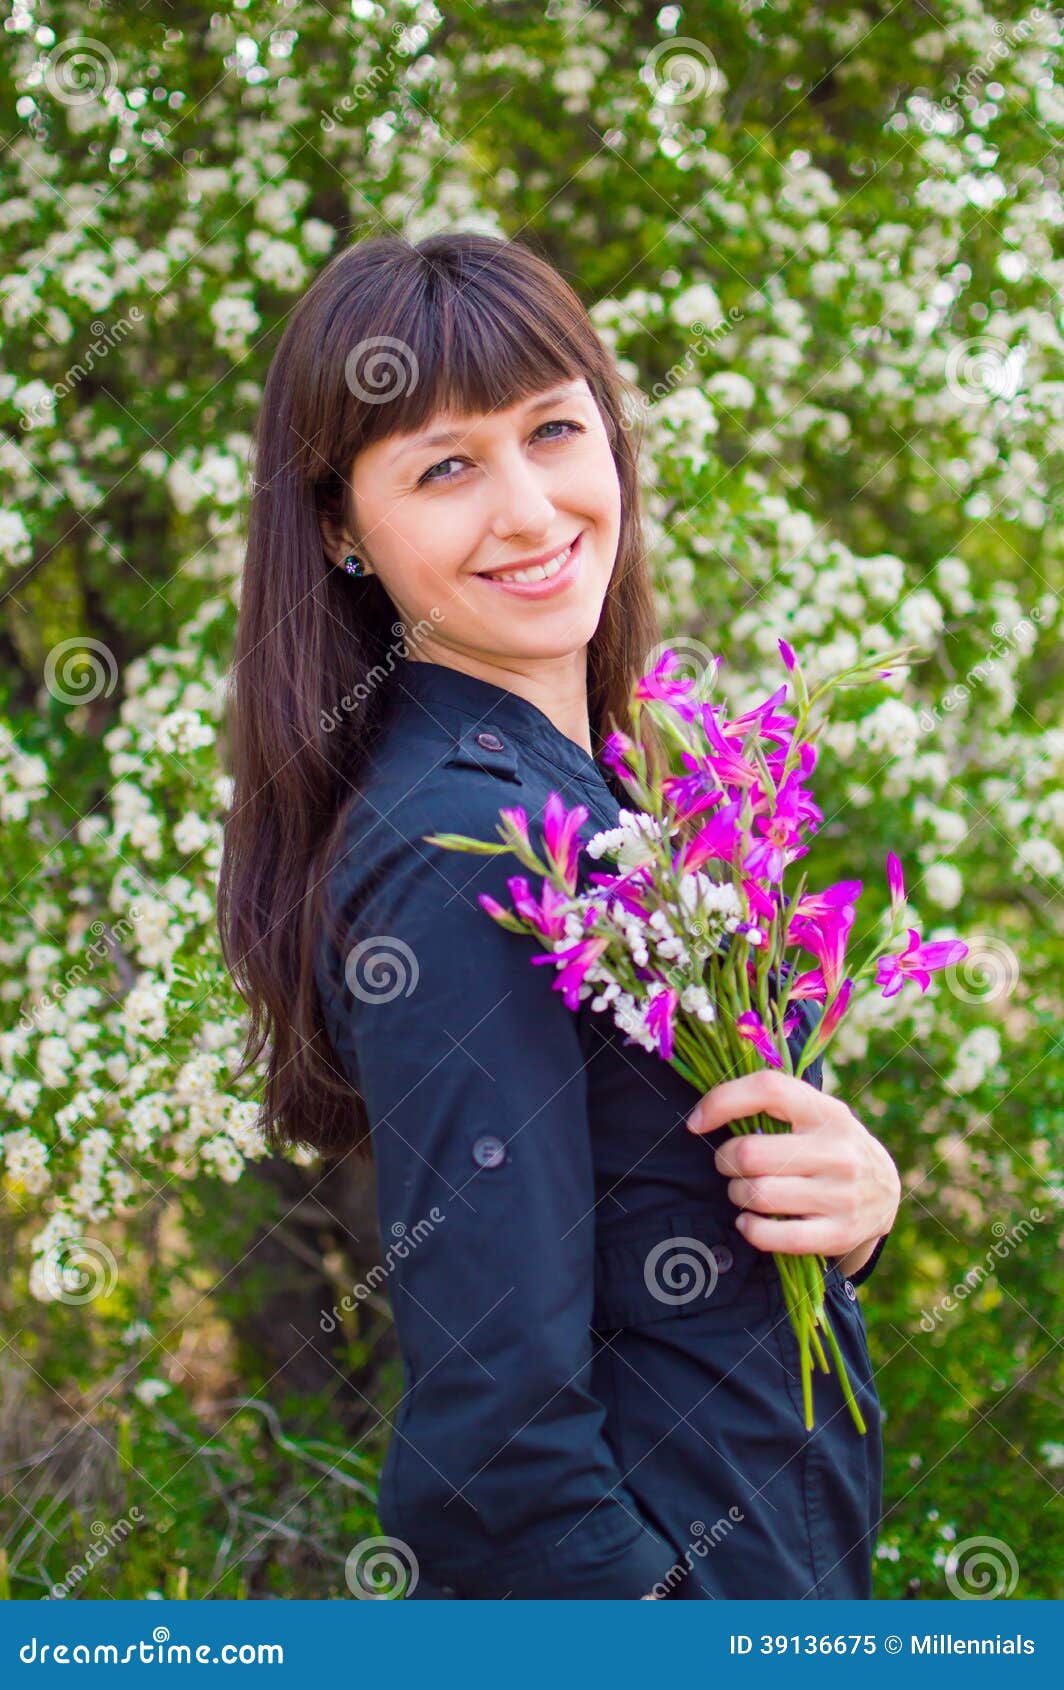 Atractive Girl with Field Flowers Stock Image - Image of springtime ...